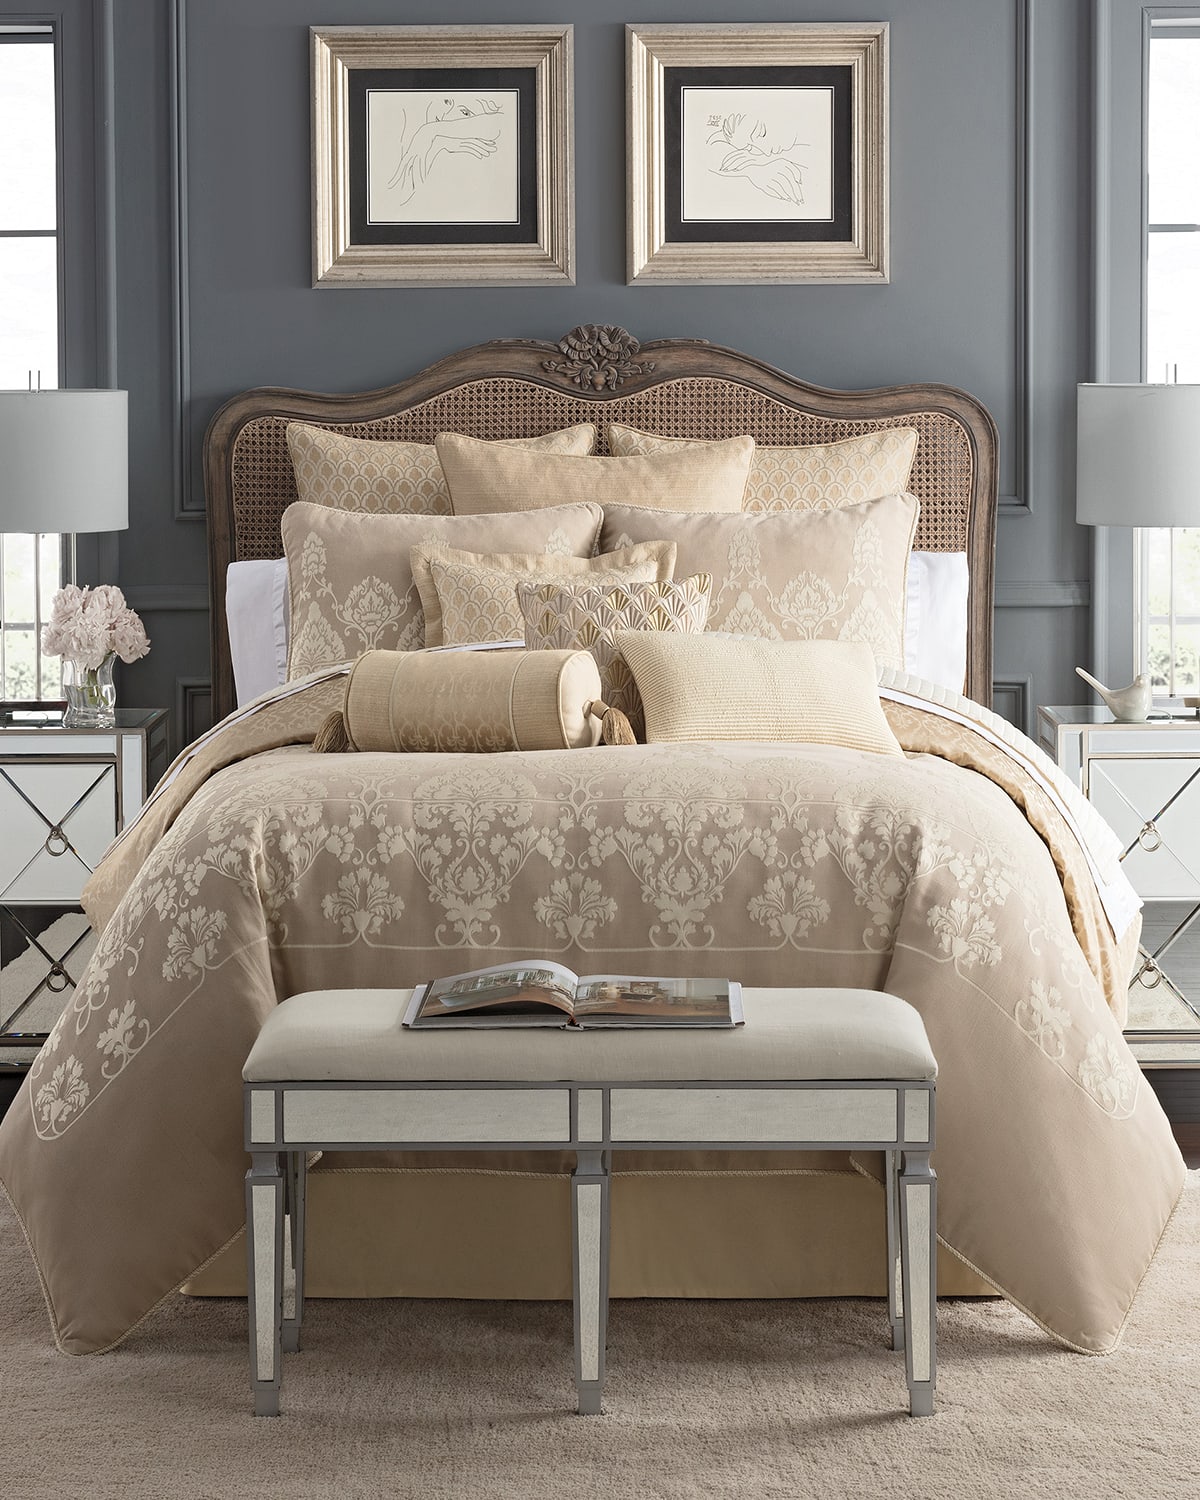 Image Waterford Abrielle Reversible 4-Piece King Comforter Set